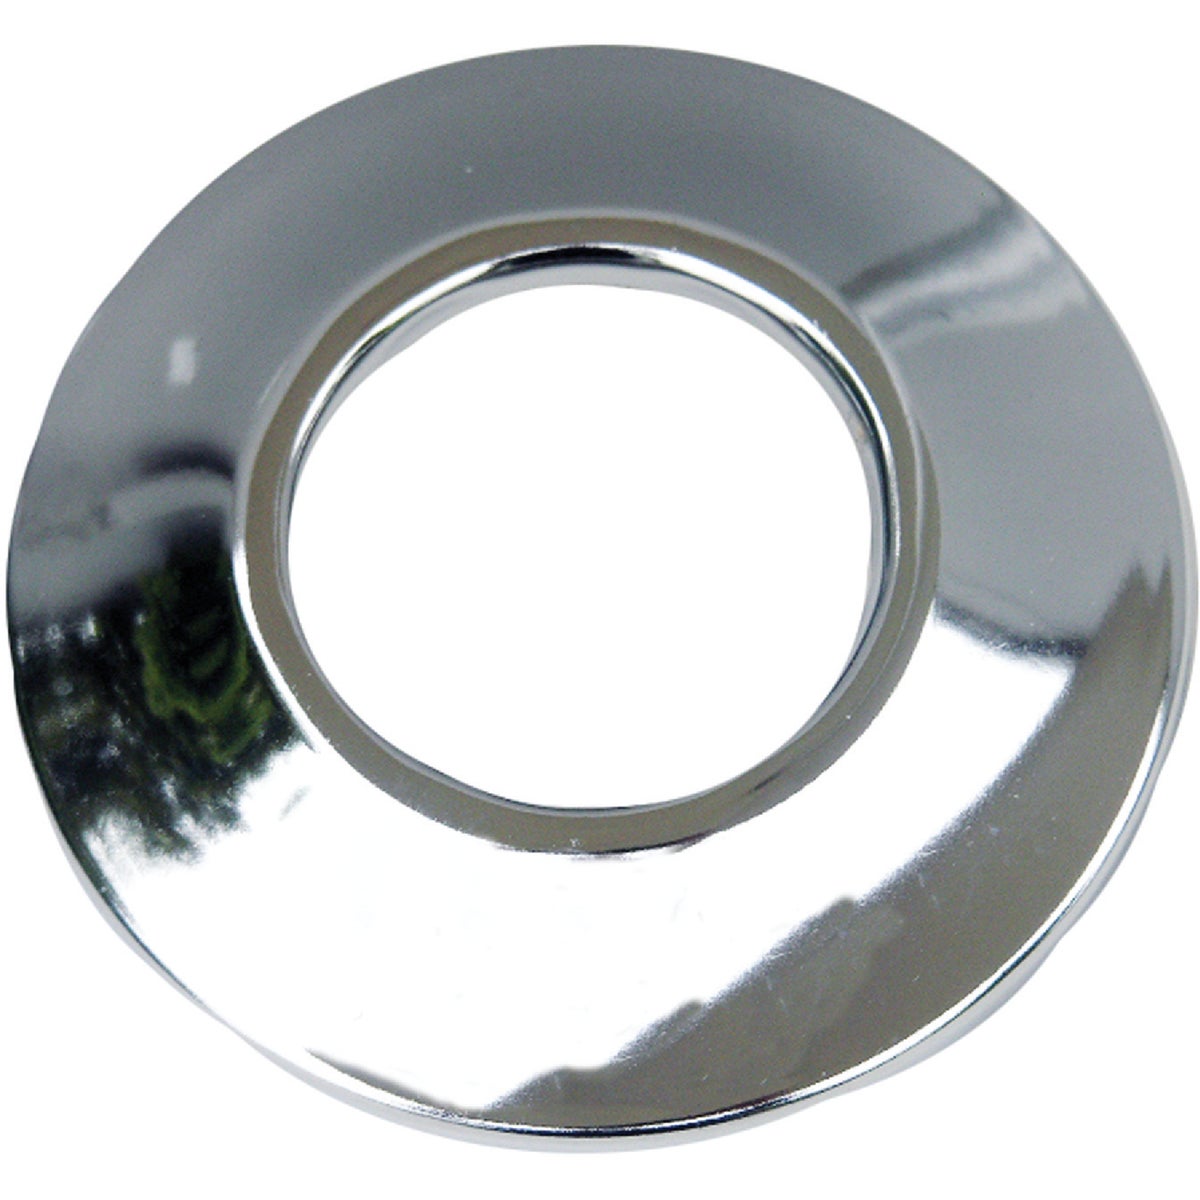 Lasco 1 In. IP Chrome Plated Flange